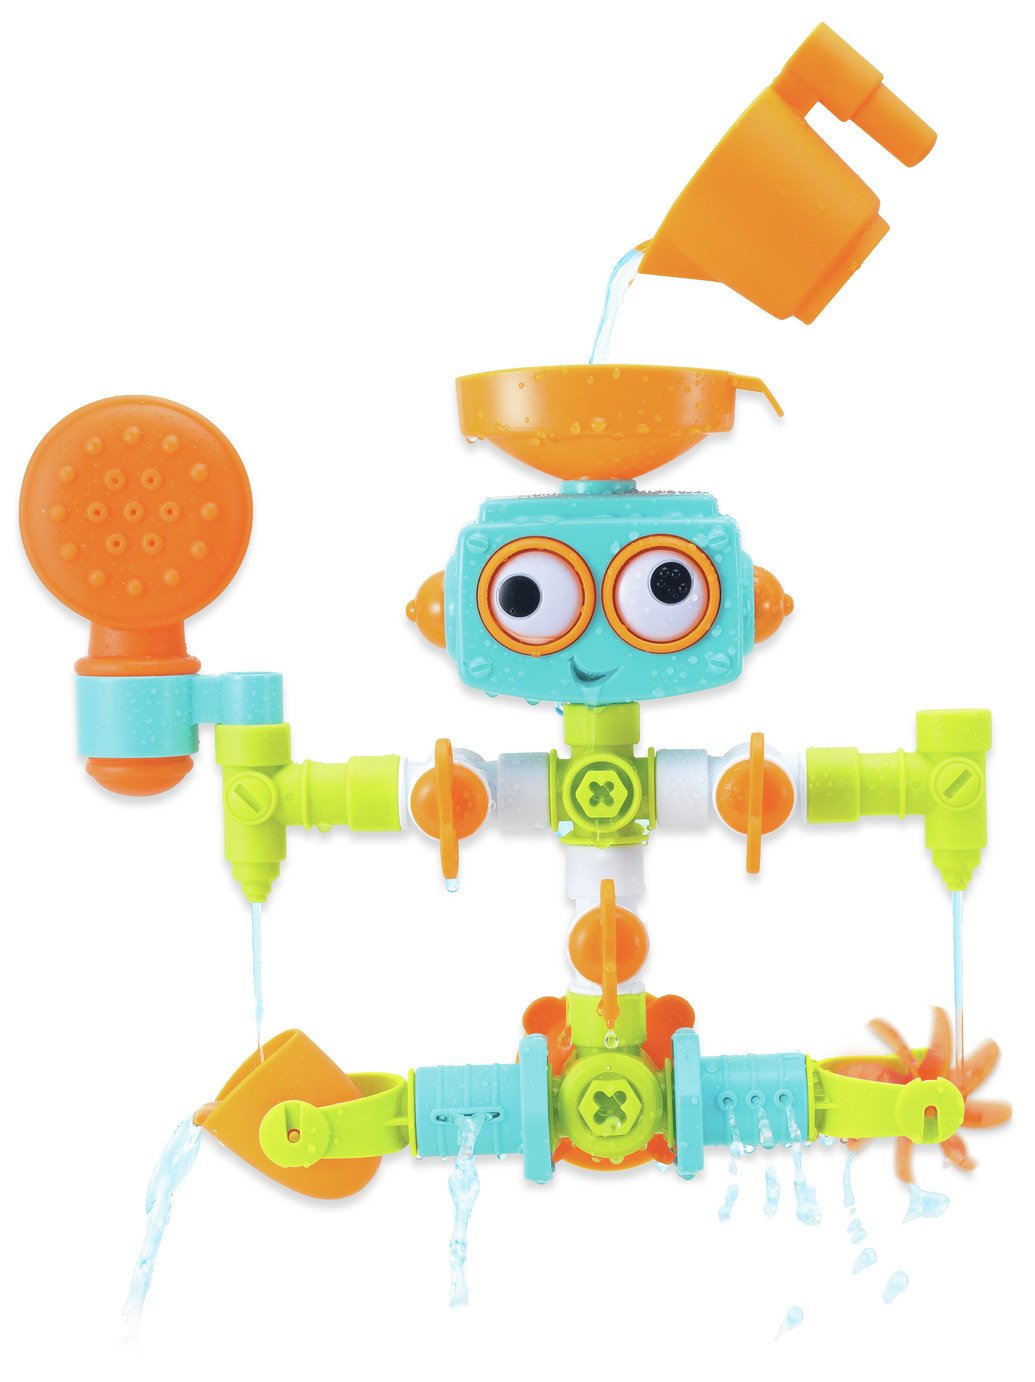 Infantino Build your own Bath Robot Review